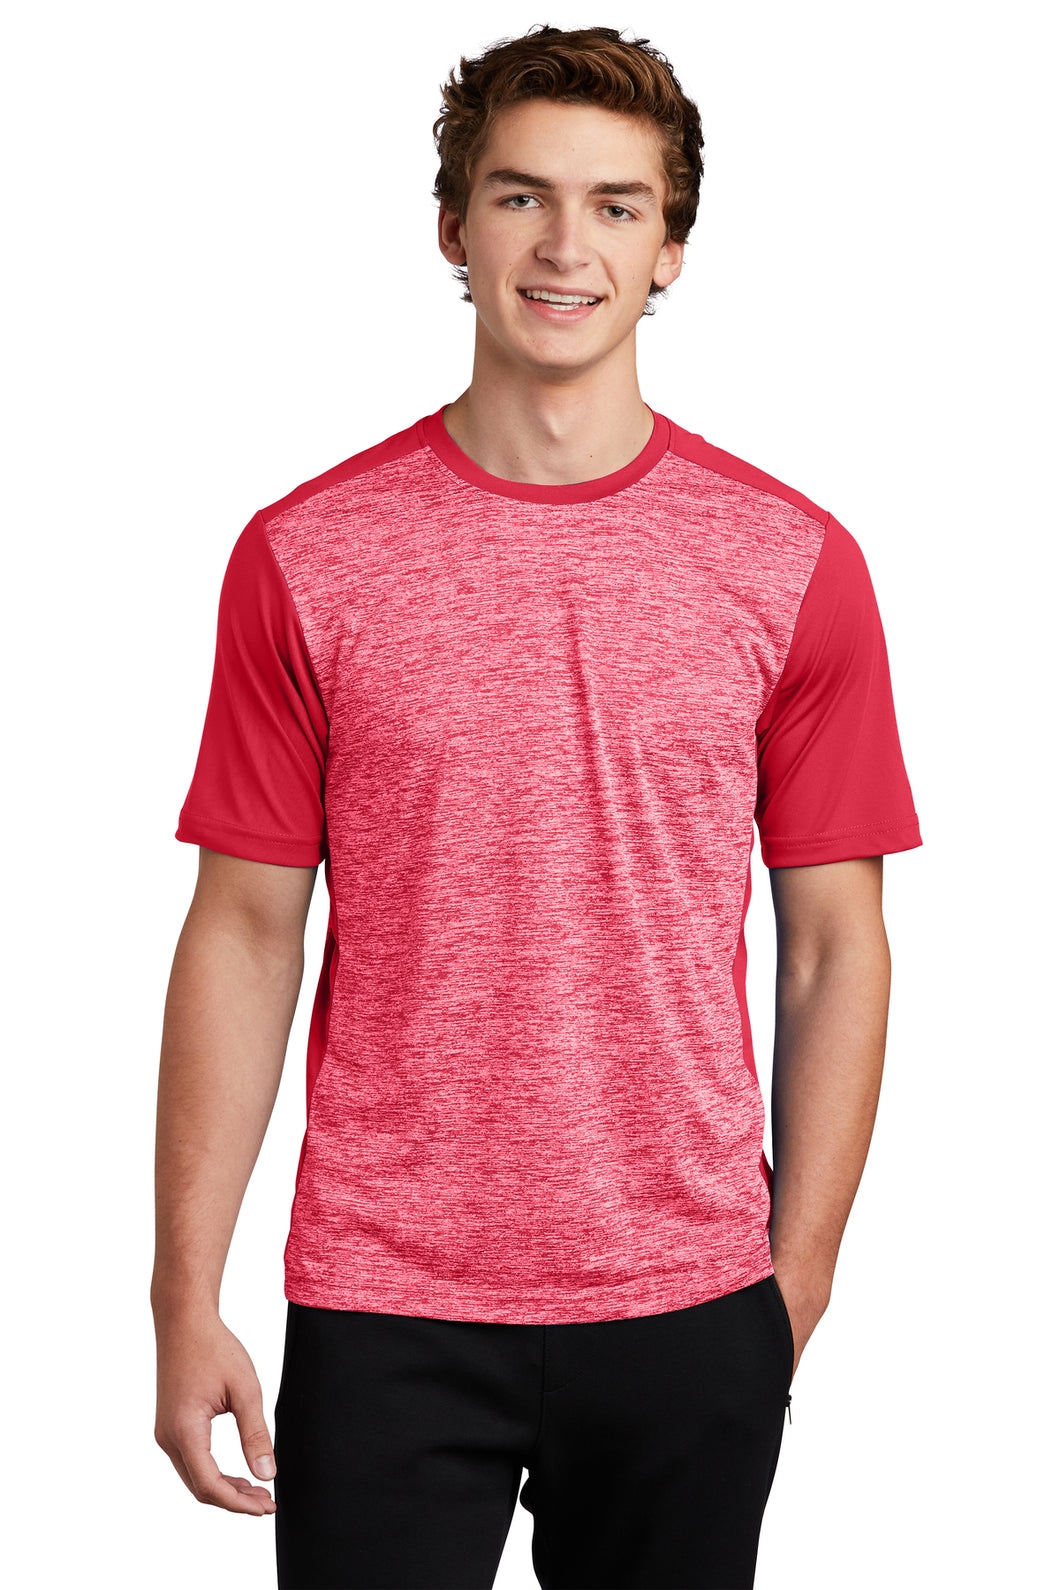 Laser Alley Performance Top - Red